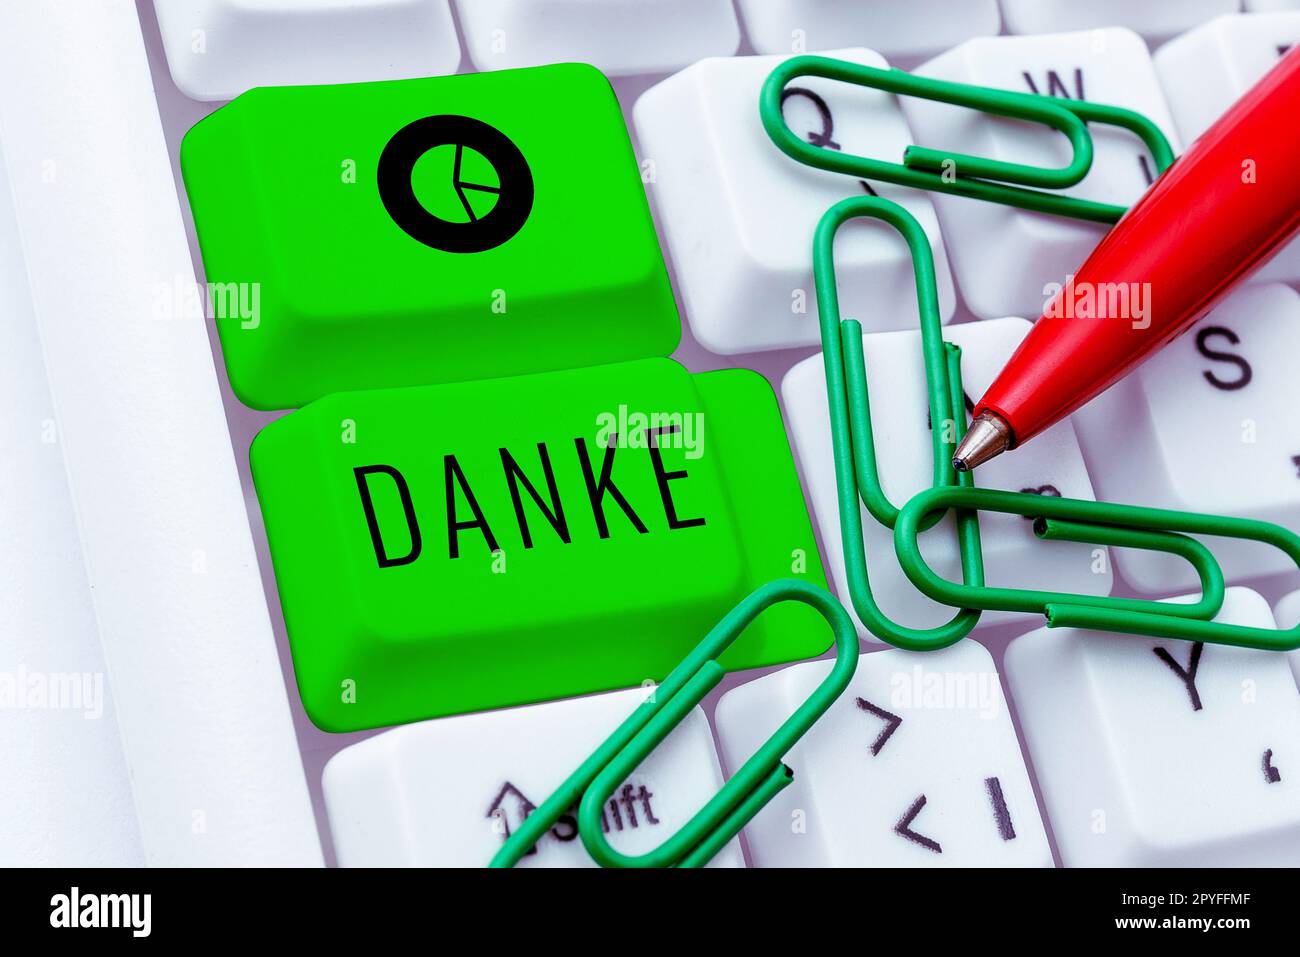 Writing displaying text Danke. Business overview used as informal way of saying thank you in German language Thanking Stock Photo